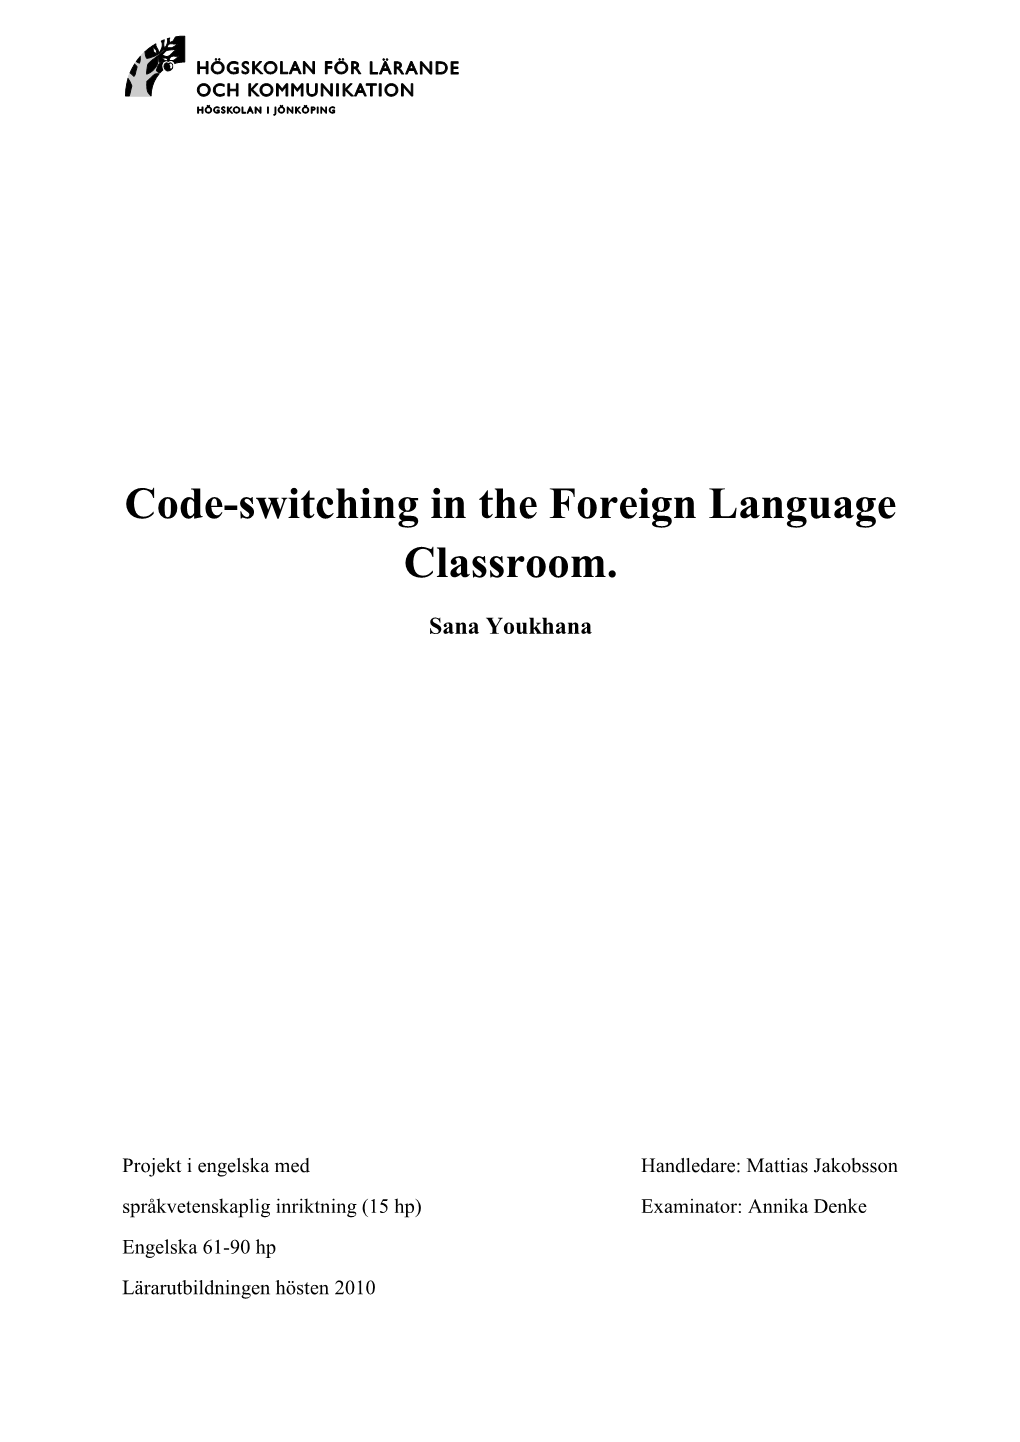 Code-Switching in the Foreign Language Classroom